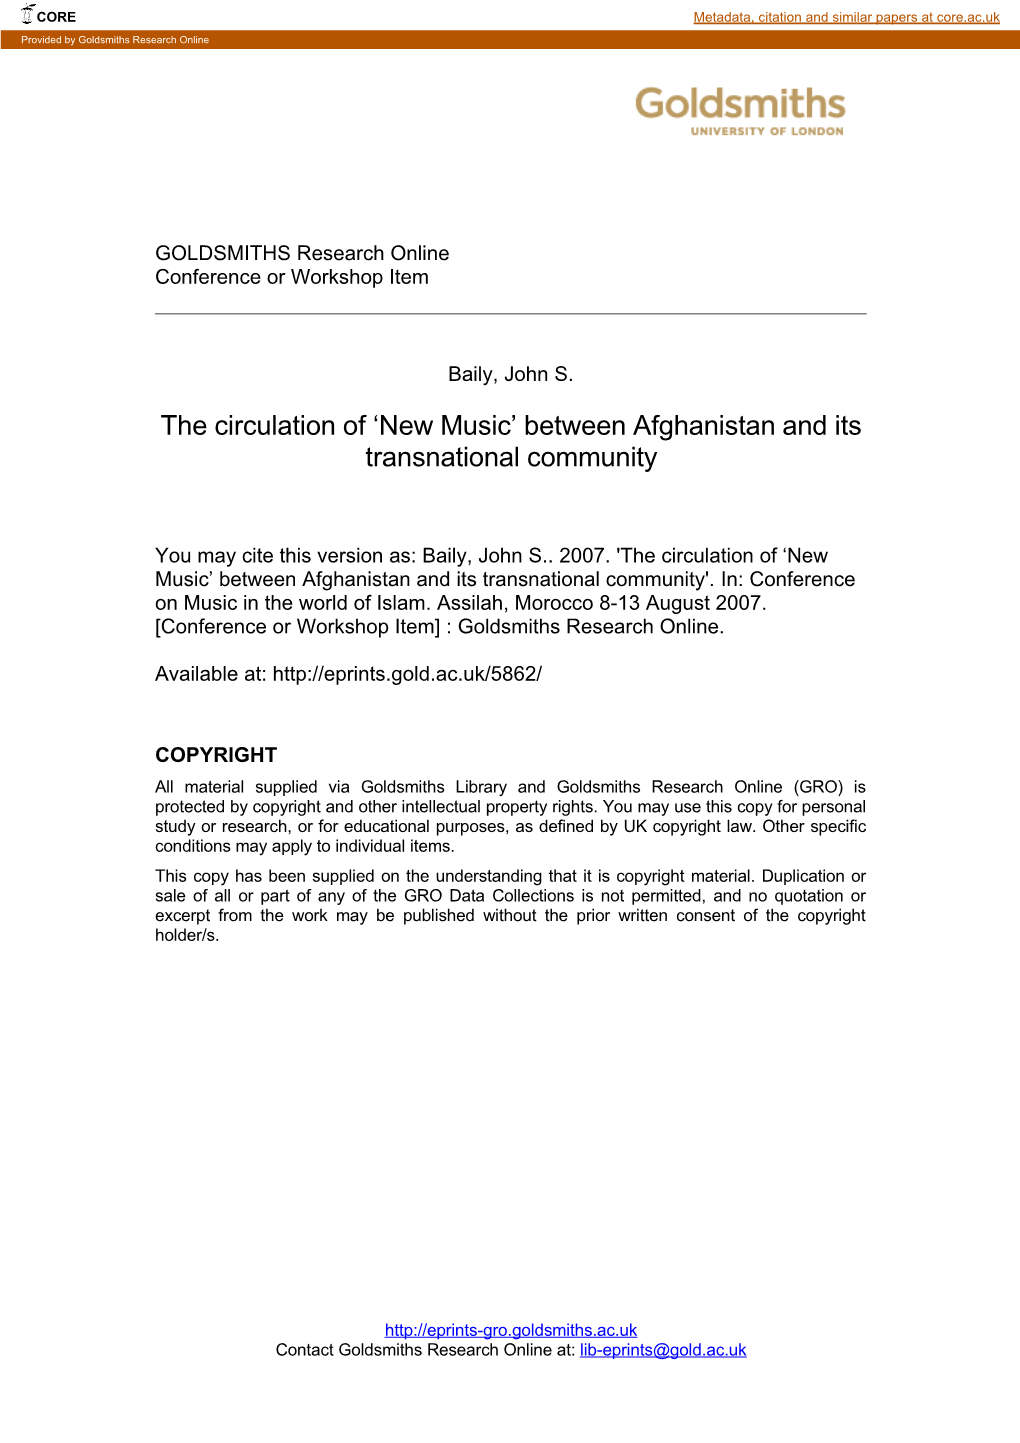 New Music" Between Afghanistan and Its Transnational Community by John Baily* (London, United Kingdom)